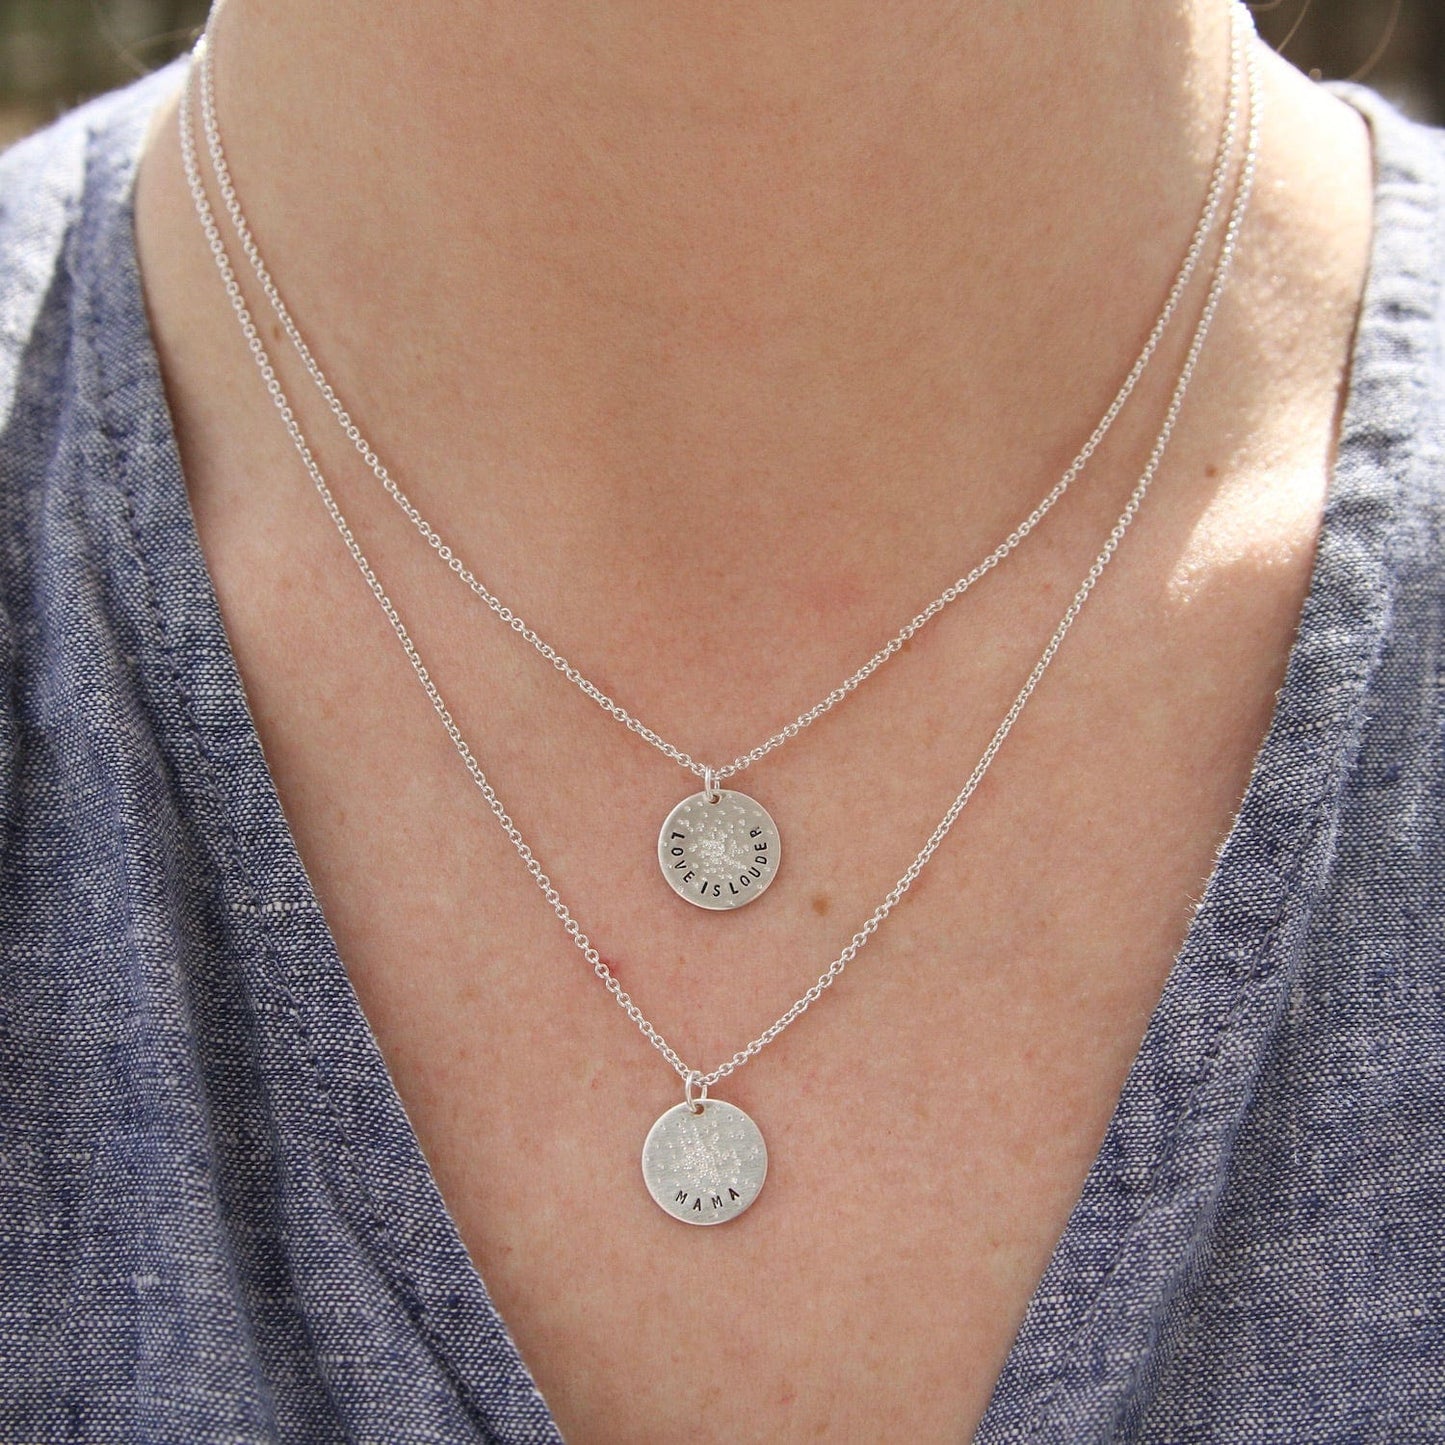 NKL Diamond Dusted Mini Coin Necklace - "Love is Louder"